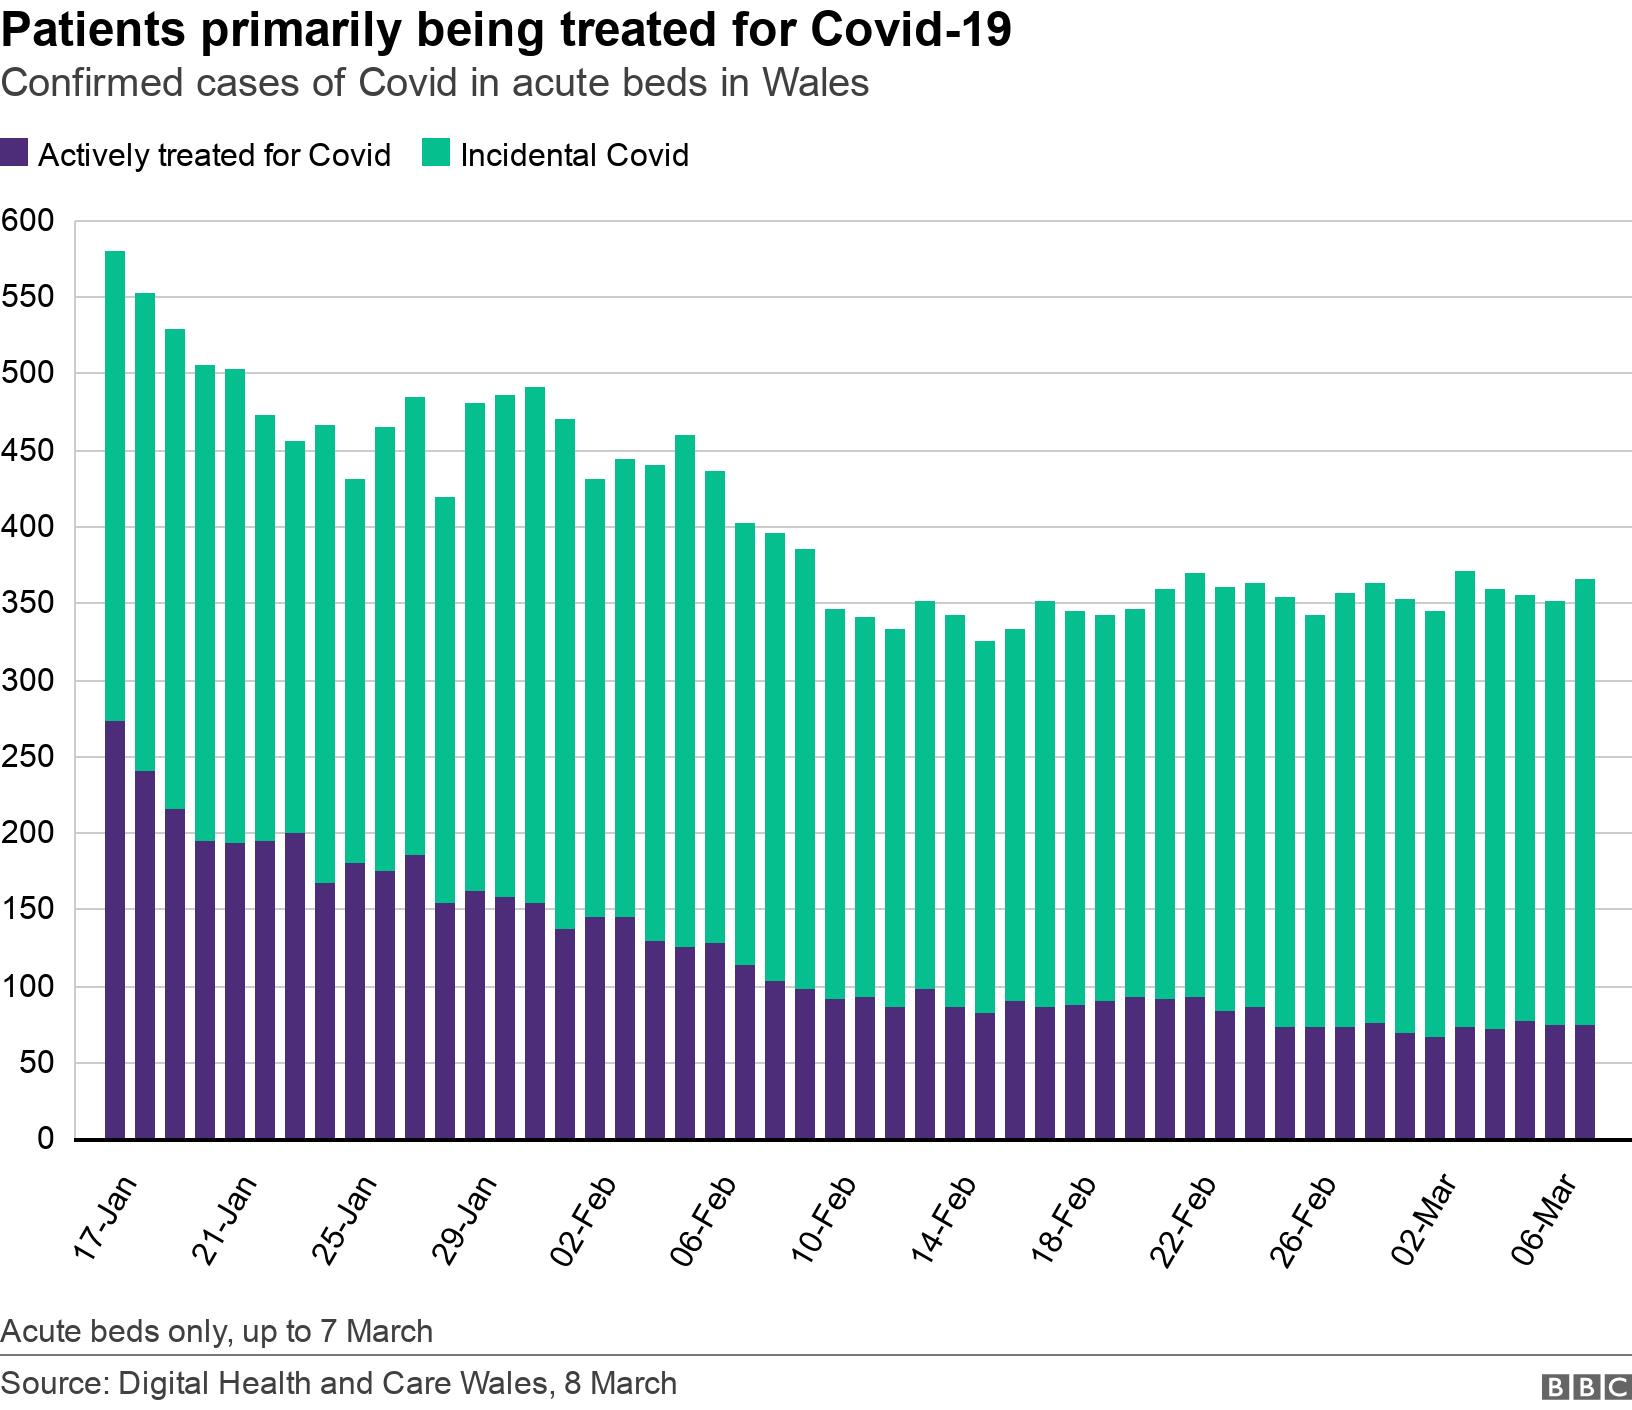 Patients primarily being treated for Covid-19. Confirmed cases of Covid in acute beds in Wales.  Acute beds only, up to 7 March.